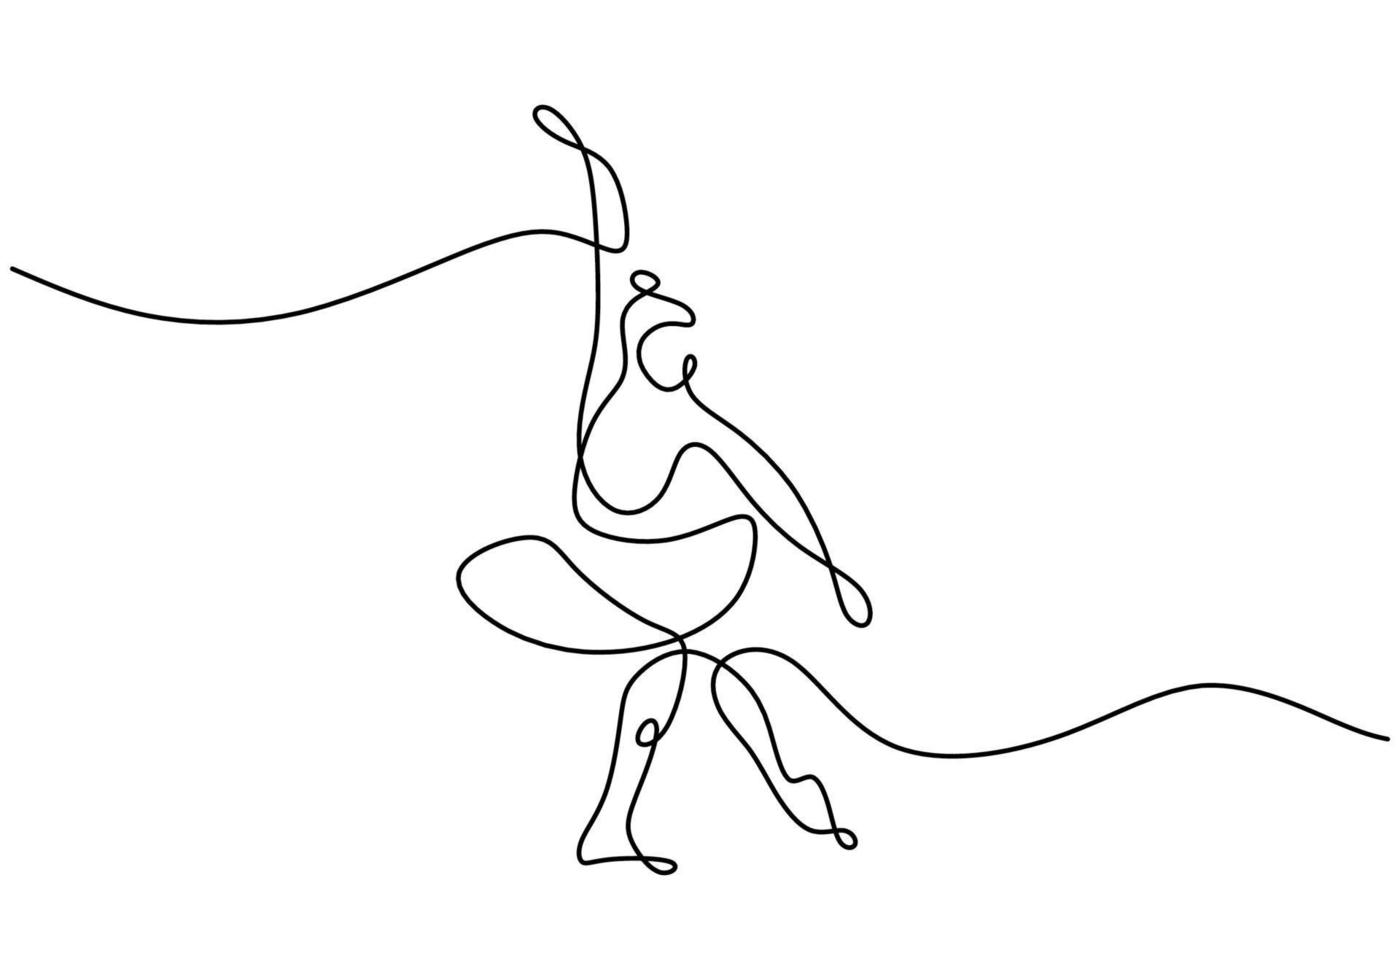 One single line drawing sexy woman ballerina. A pretty ballet dancer show dance motion isolated on white background. Professional ballerina concept minimalism style. Vector illustration